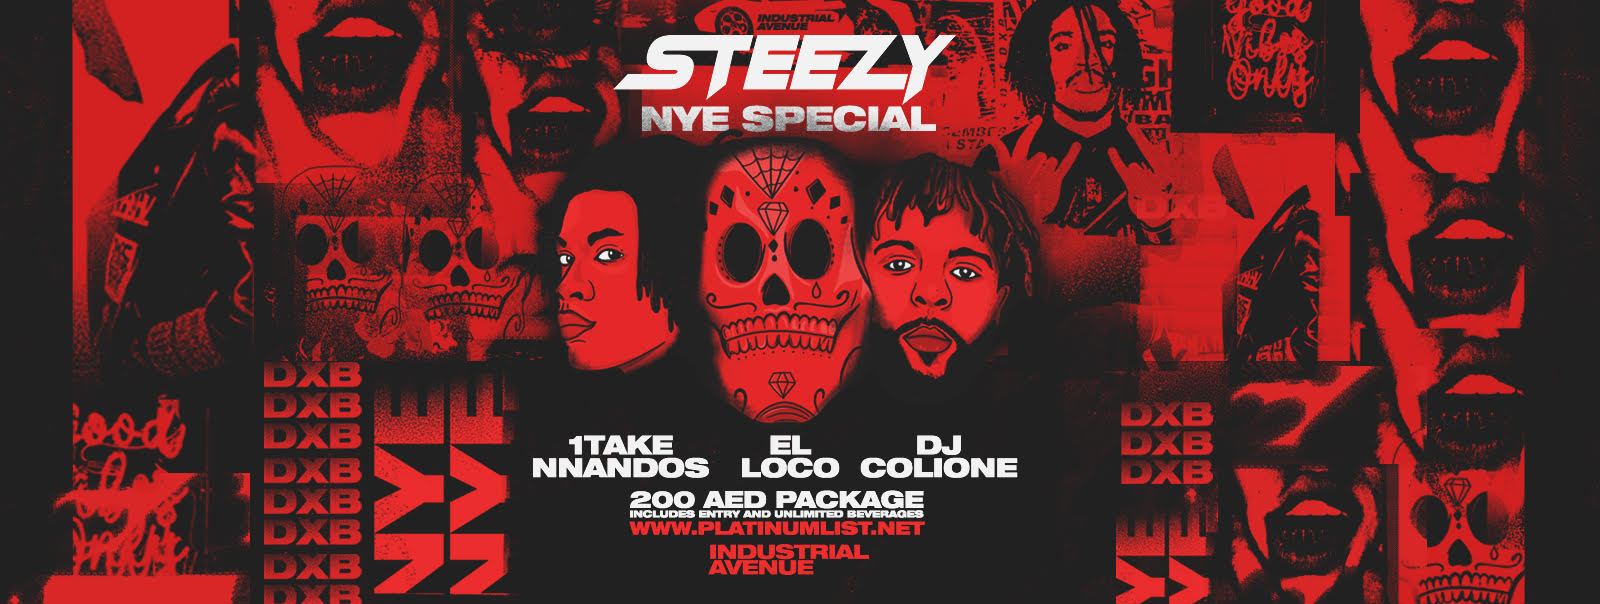 STEEZY New Year’s Eve Special - Coming Soon in UAE